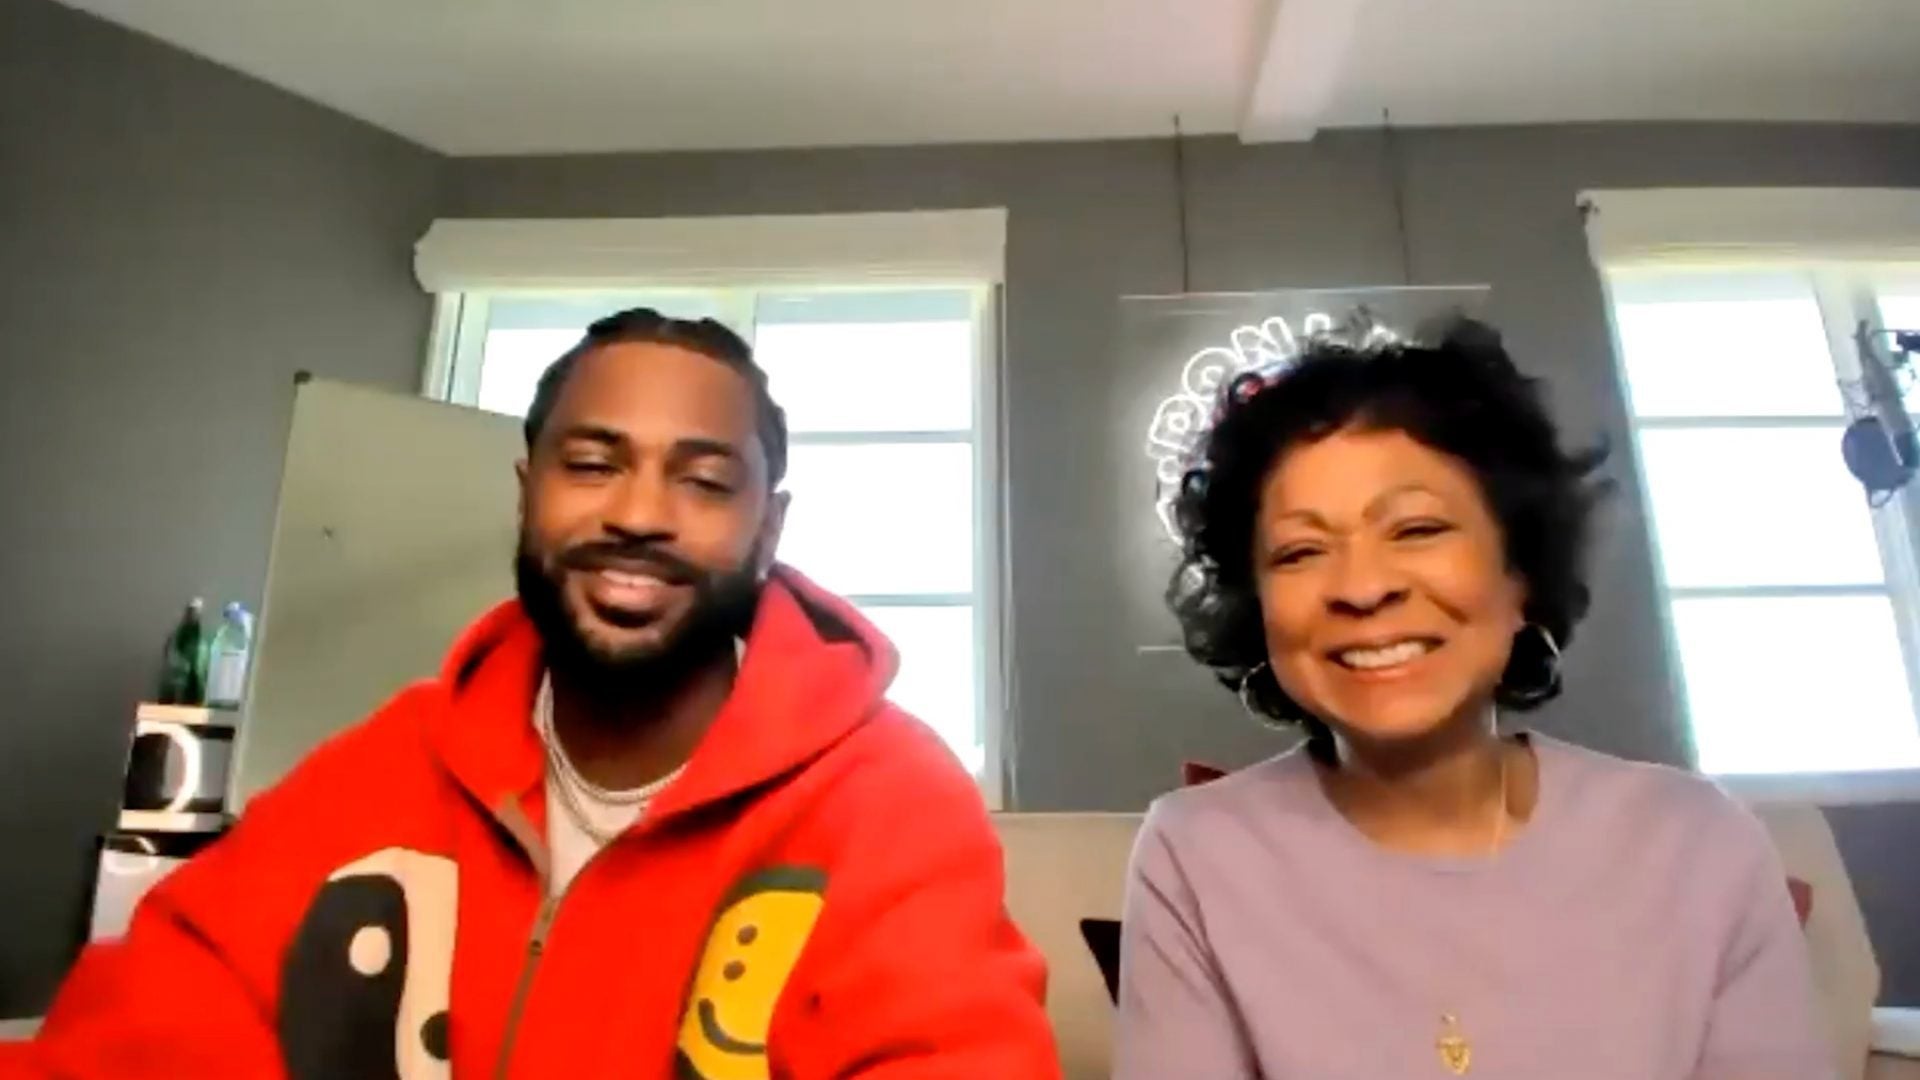 Big Sean's Depression And Anxiety Struggles Inspired Him, And His Mom, To Help Others